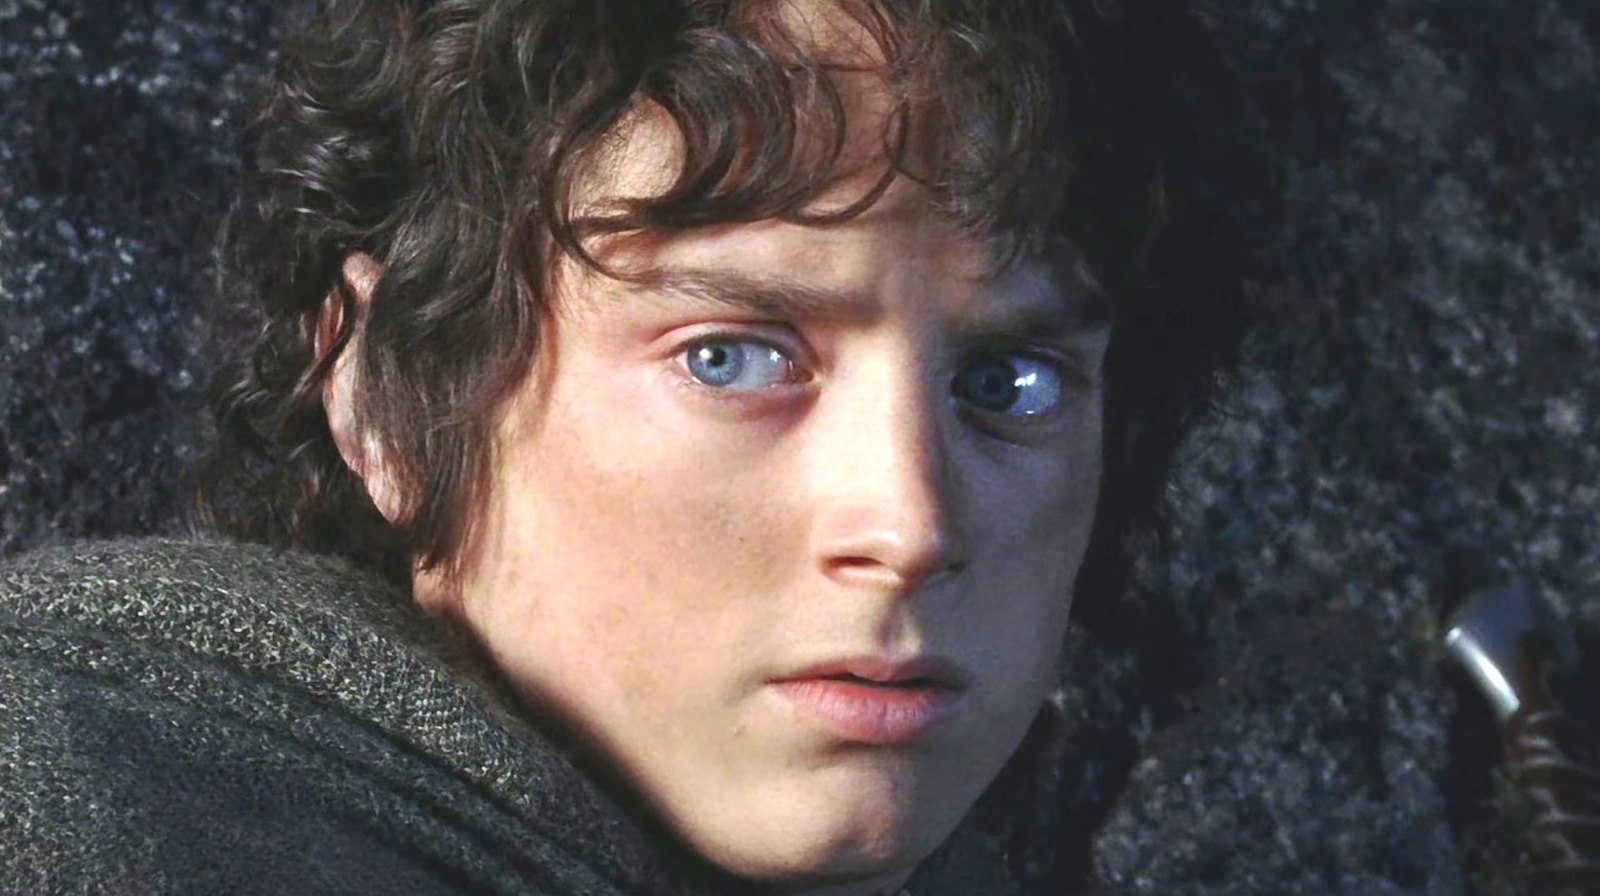 Lord of the Rings: debunking the backlash against non-white actors